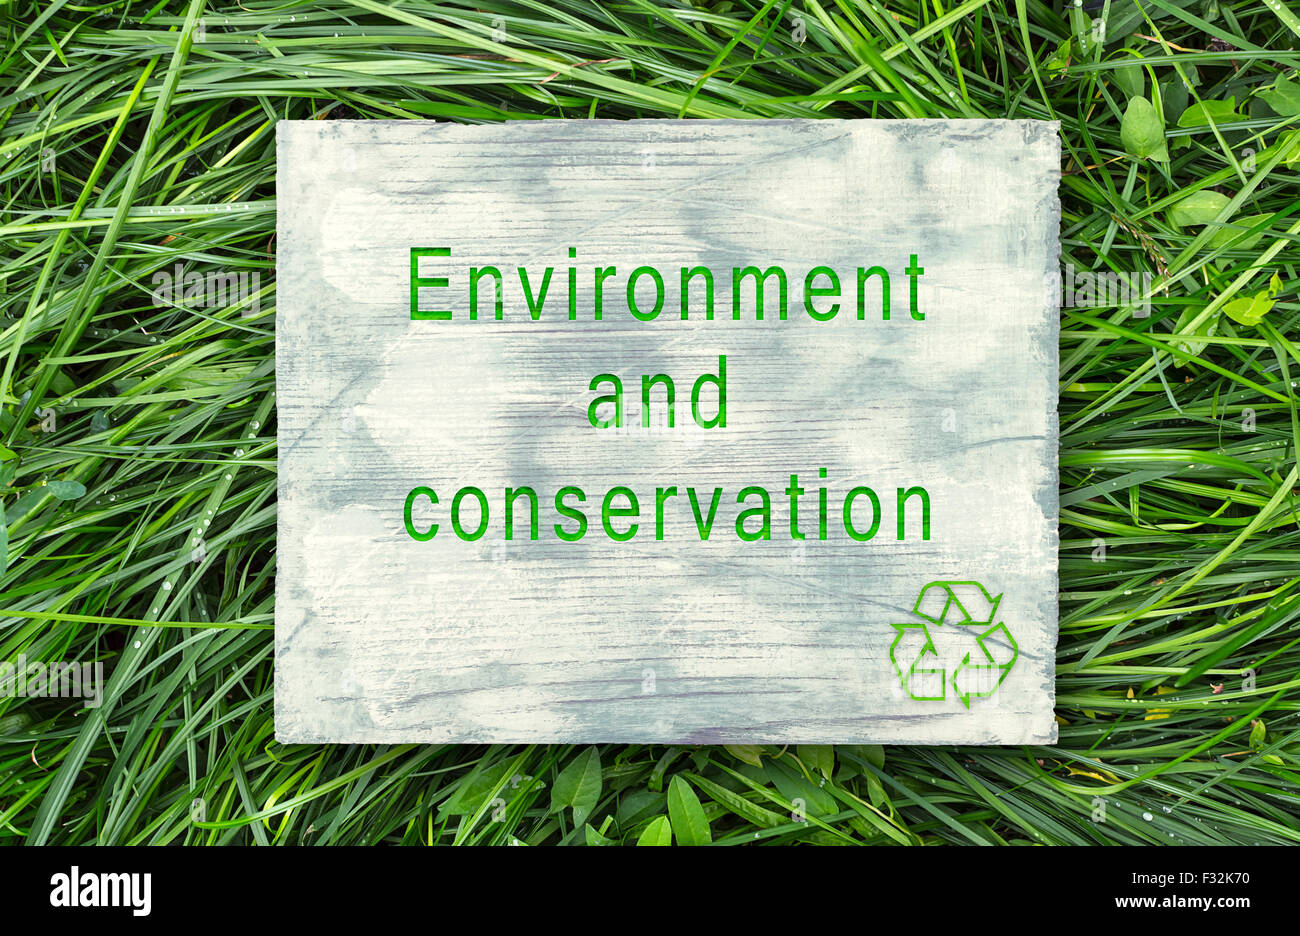 Message about ecological awareness, Environment and conservation. Stock Photo